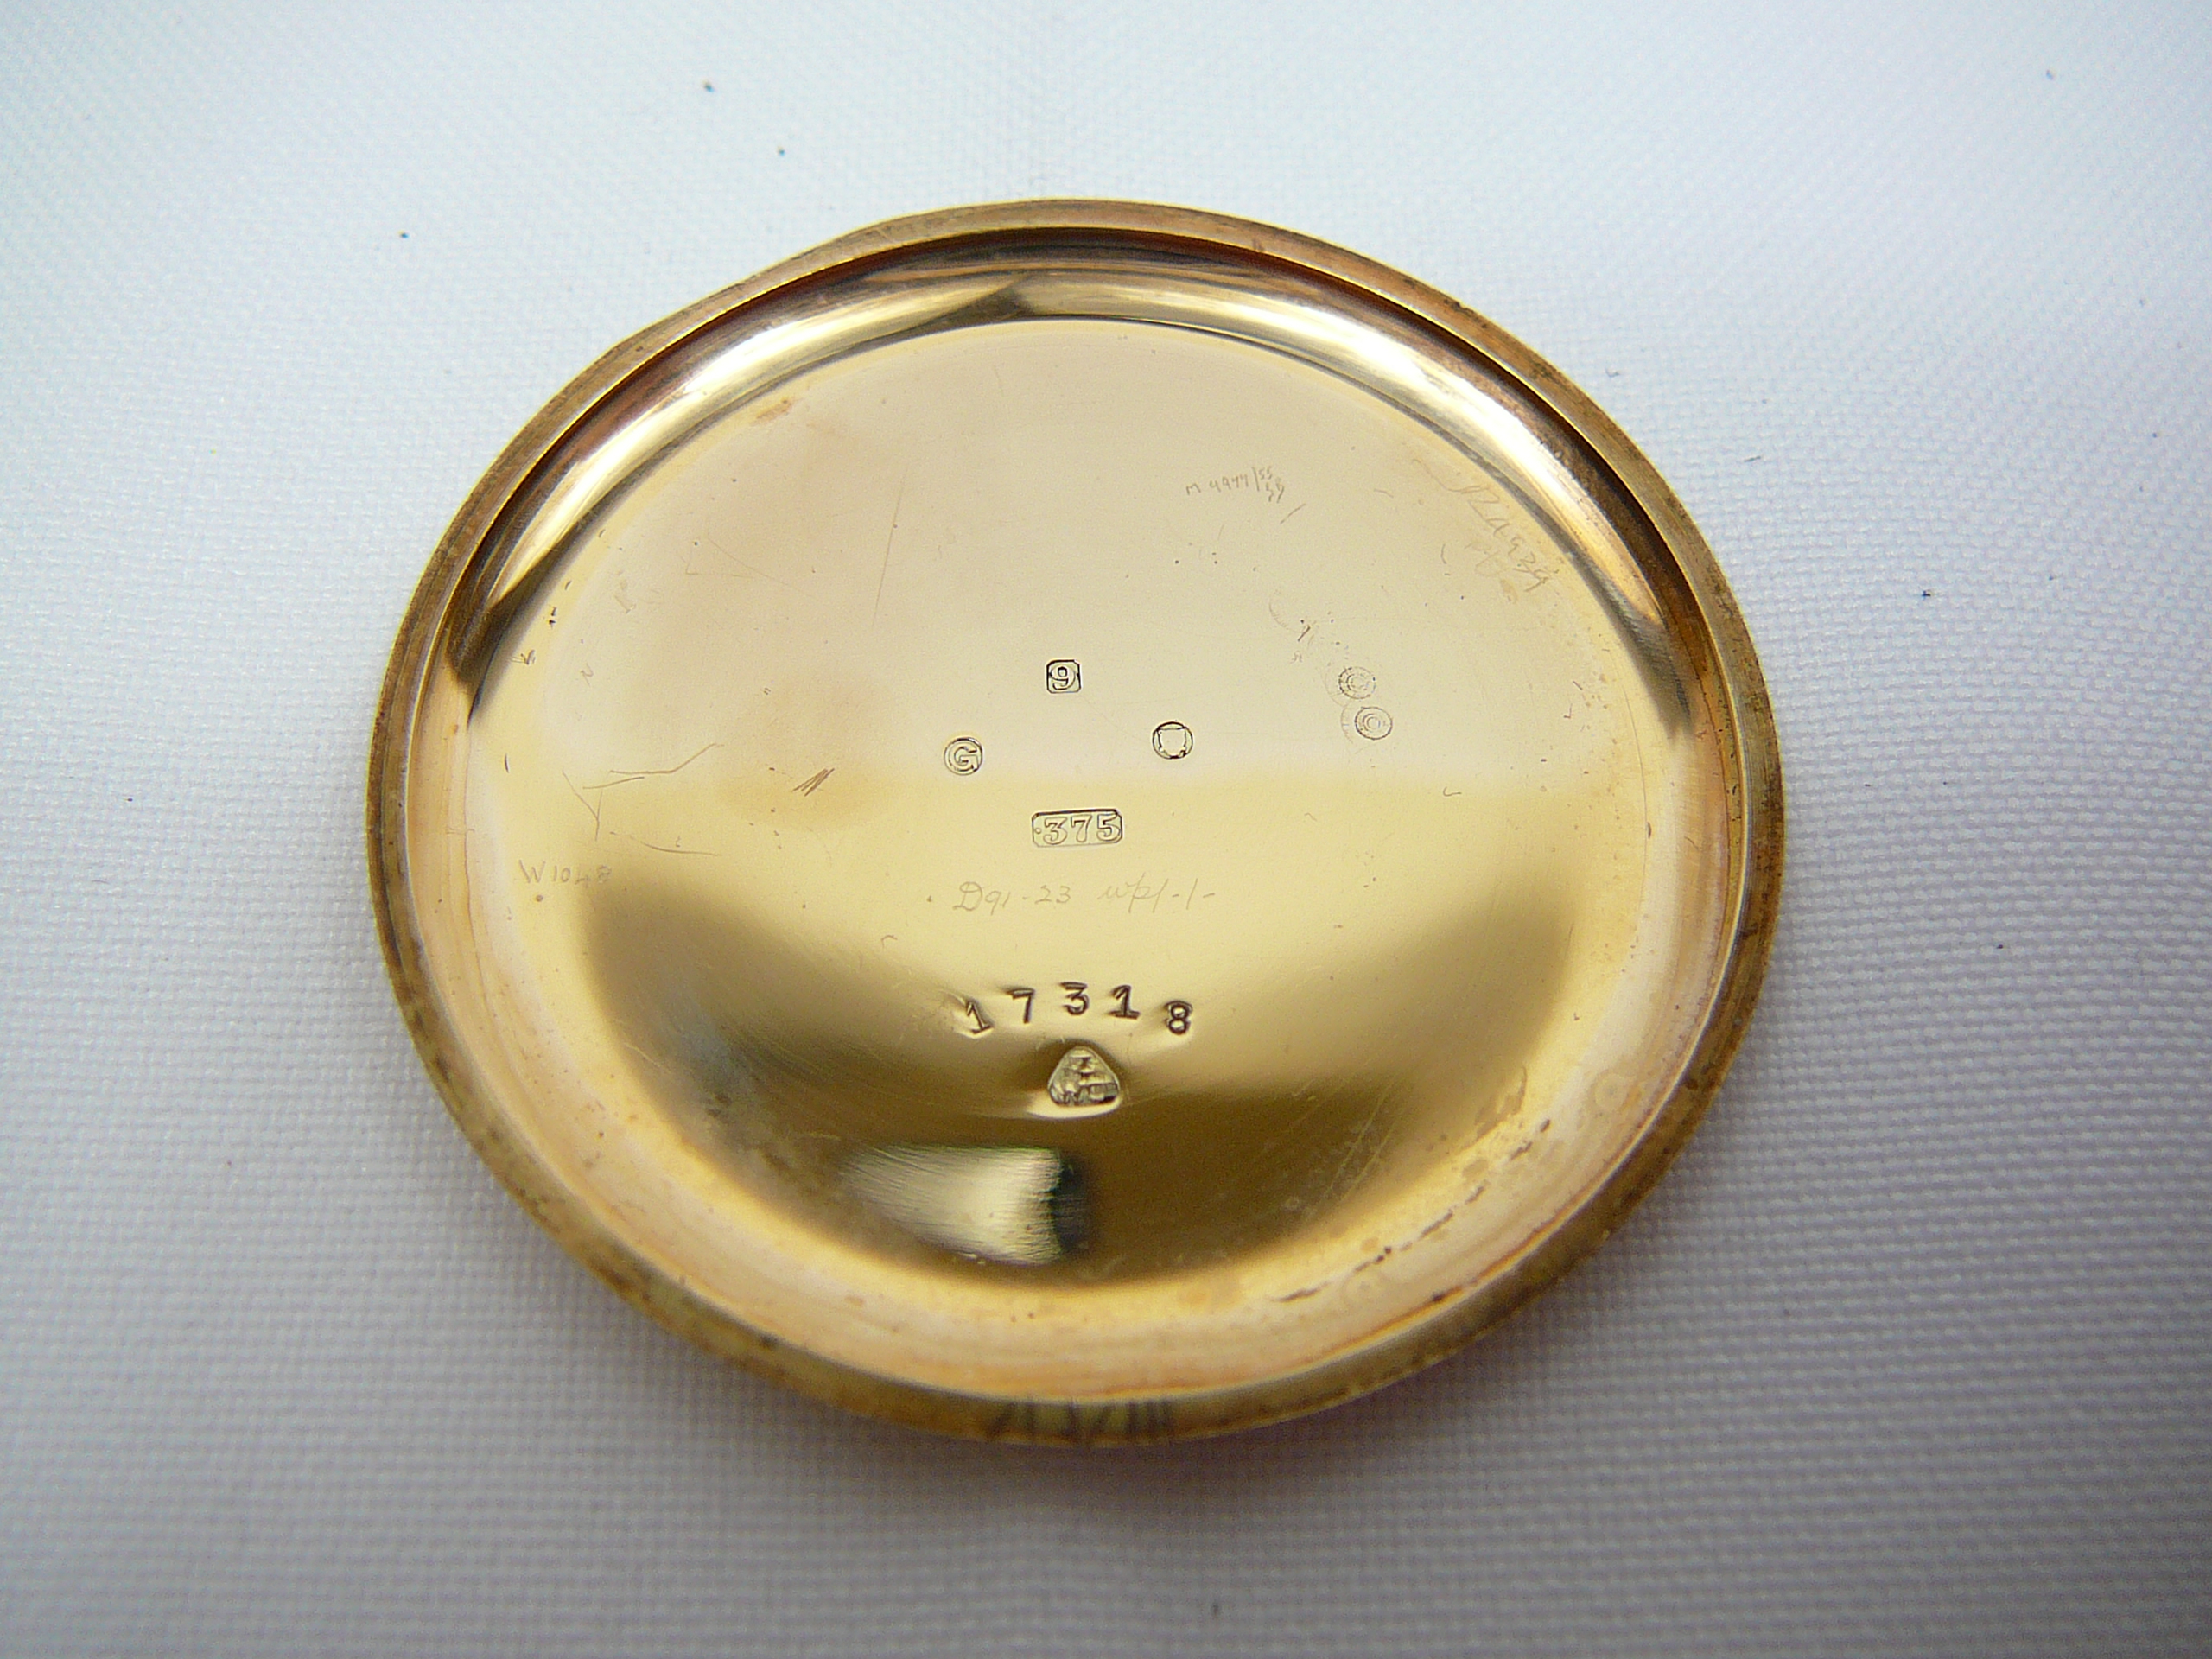 Gents gold Zenith pocketwatch - Image 9 of 10